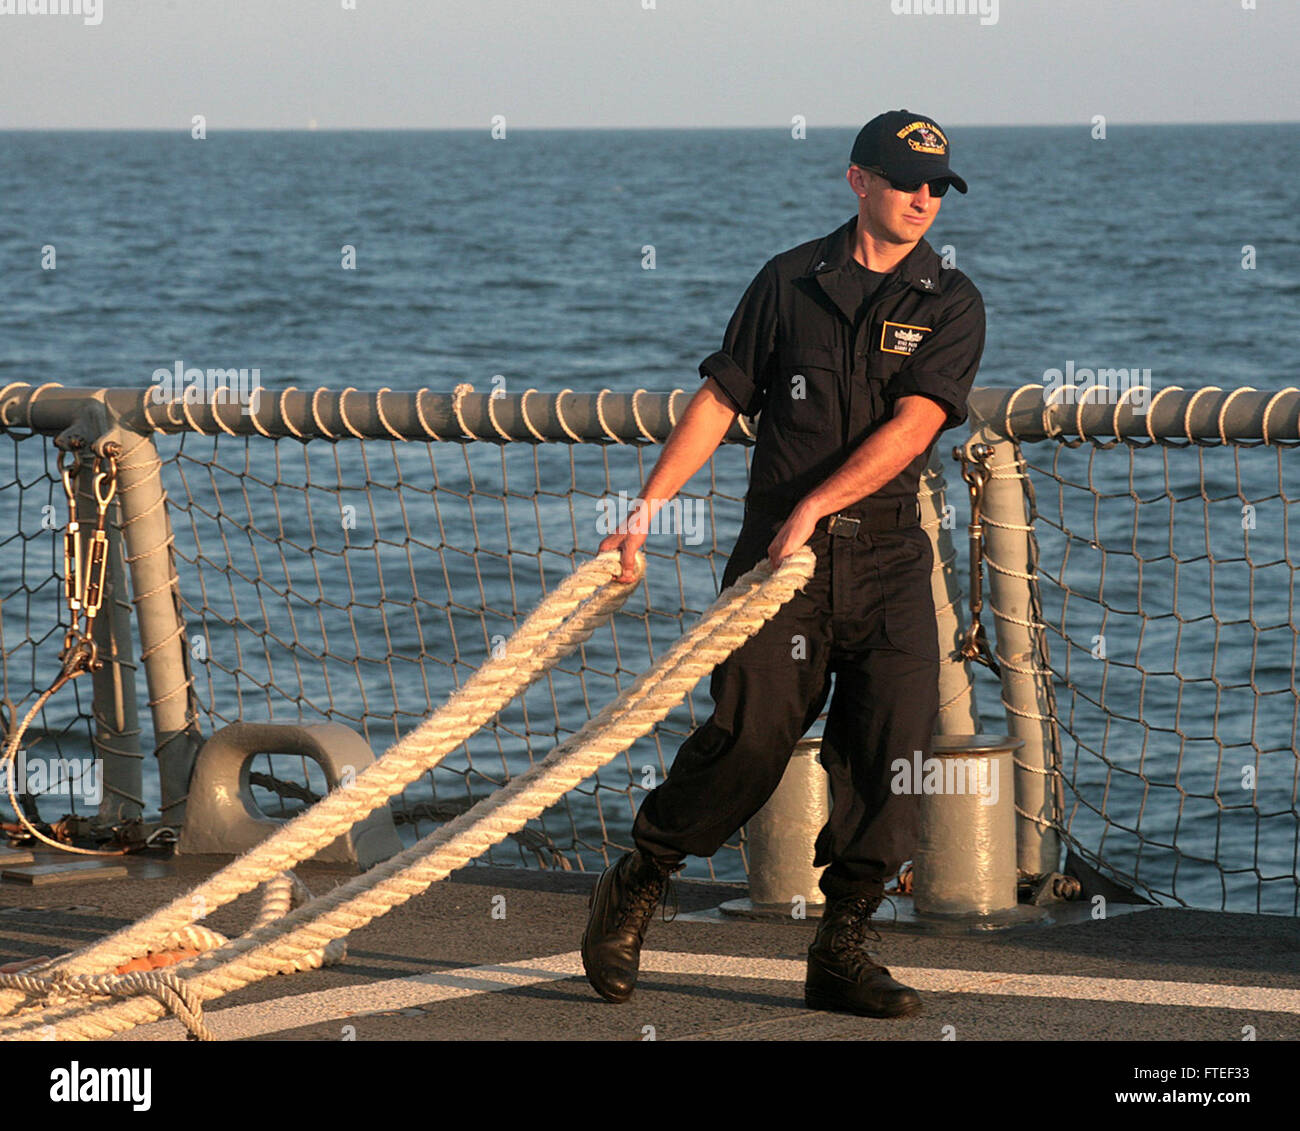 MEDITERRANEAN SEA (Nov. 25, 2014) - Sonar Technician (Geographic) 2nd Class Matthew Paiva breaks out the mooring lines on the flight deck aboard USS Samuel B. Roberts (FFG 58) in preparation for port visit, Nov. 25, 2014. Samuel B. Roberts, a guided-missile frigate, homeported in Mayport, Florida, is conducting naval operations in the U.S. 6th Fleet area of operations in support of U.S. national security interests in Europe and Africa. (U.S. Navy photo by Ensign Evan Albright) Stock Photo